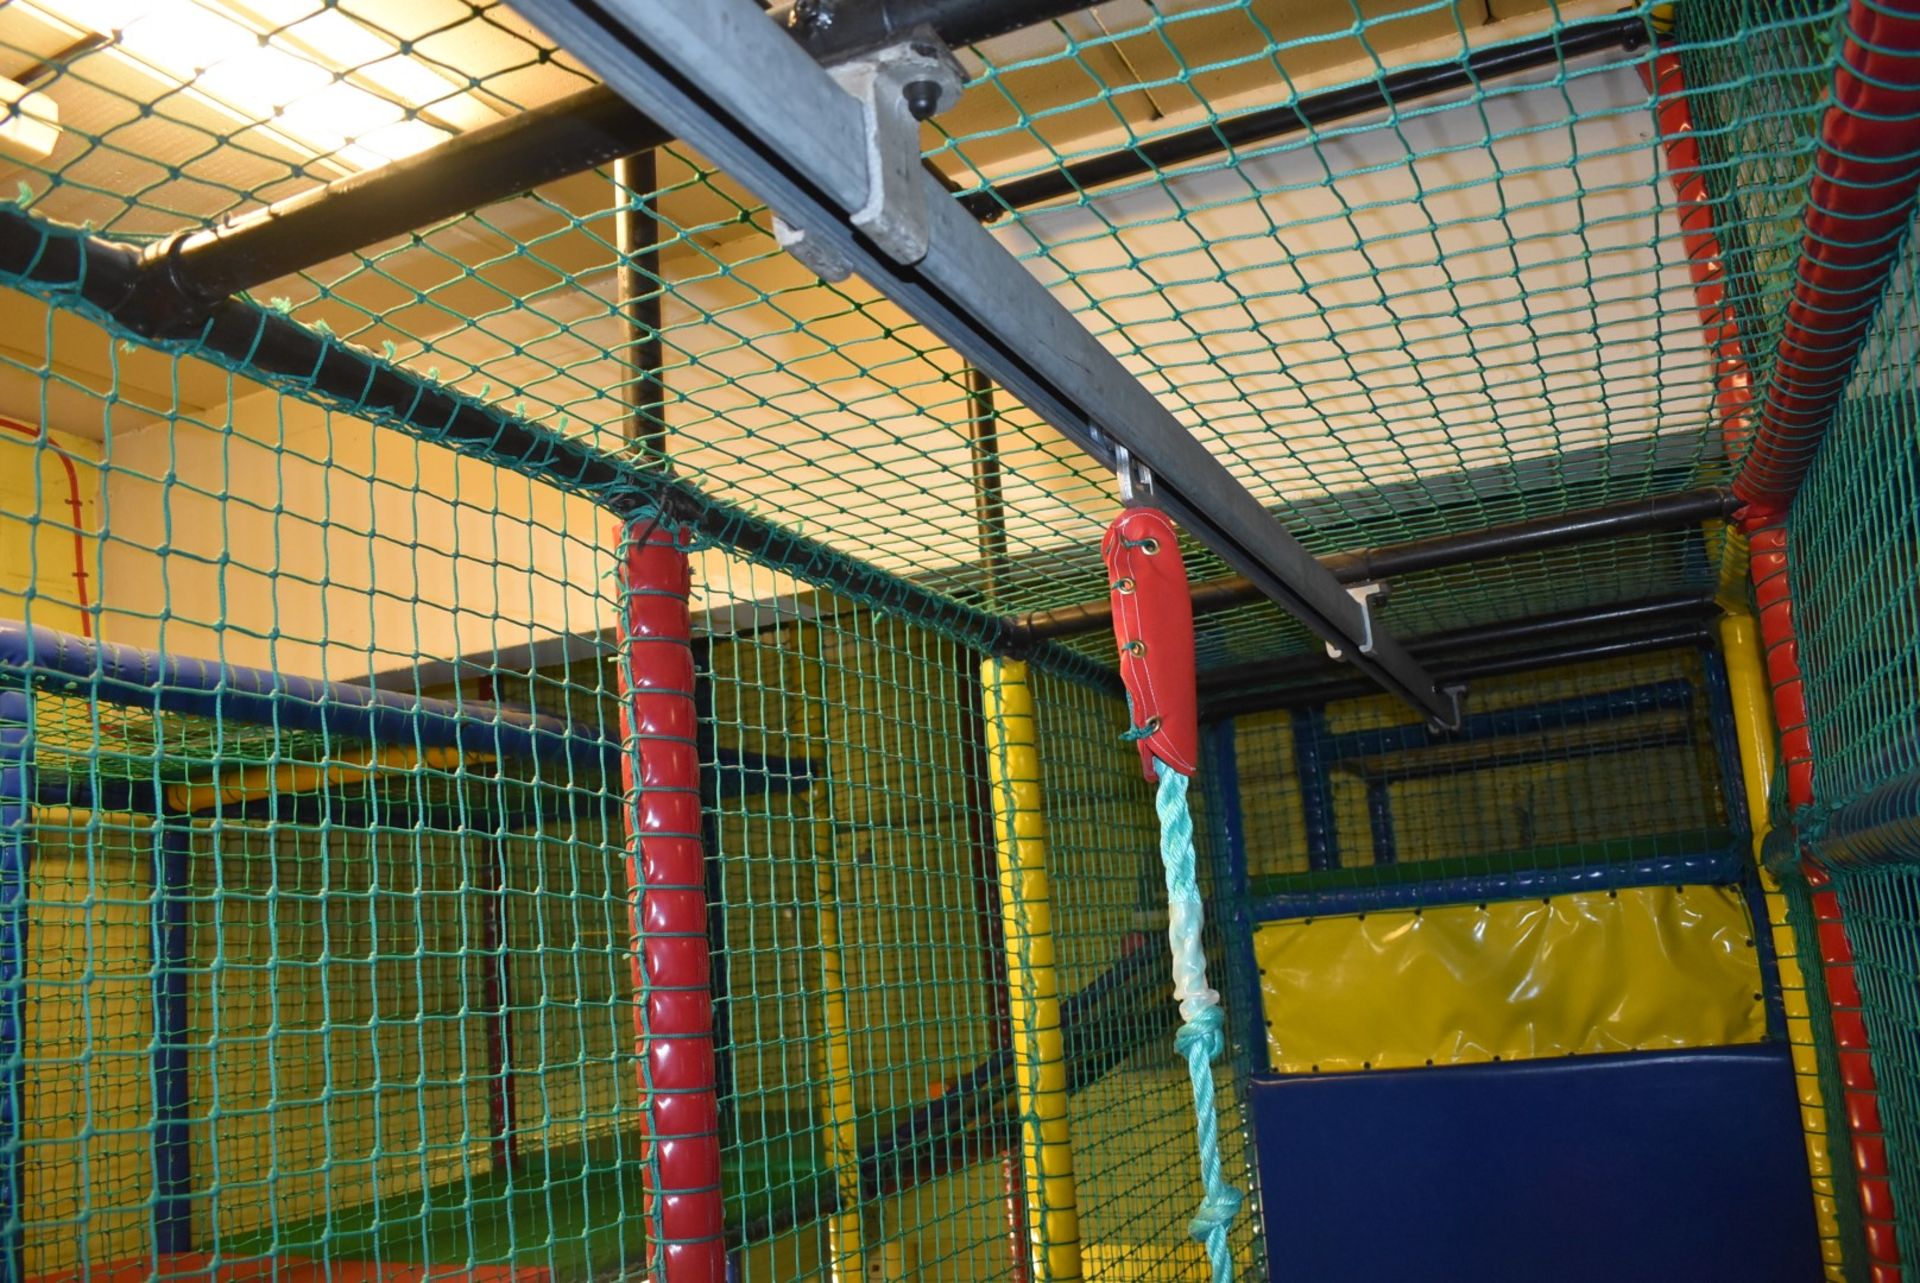 Bramleys Big Adventure Playground - Giant Action-Packed Playcentre With Slides, Zip Line Swings, - Image 23 of 99